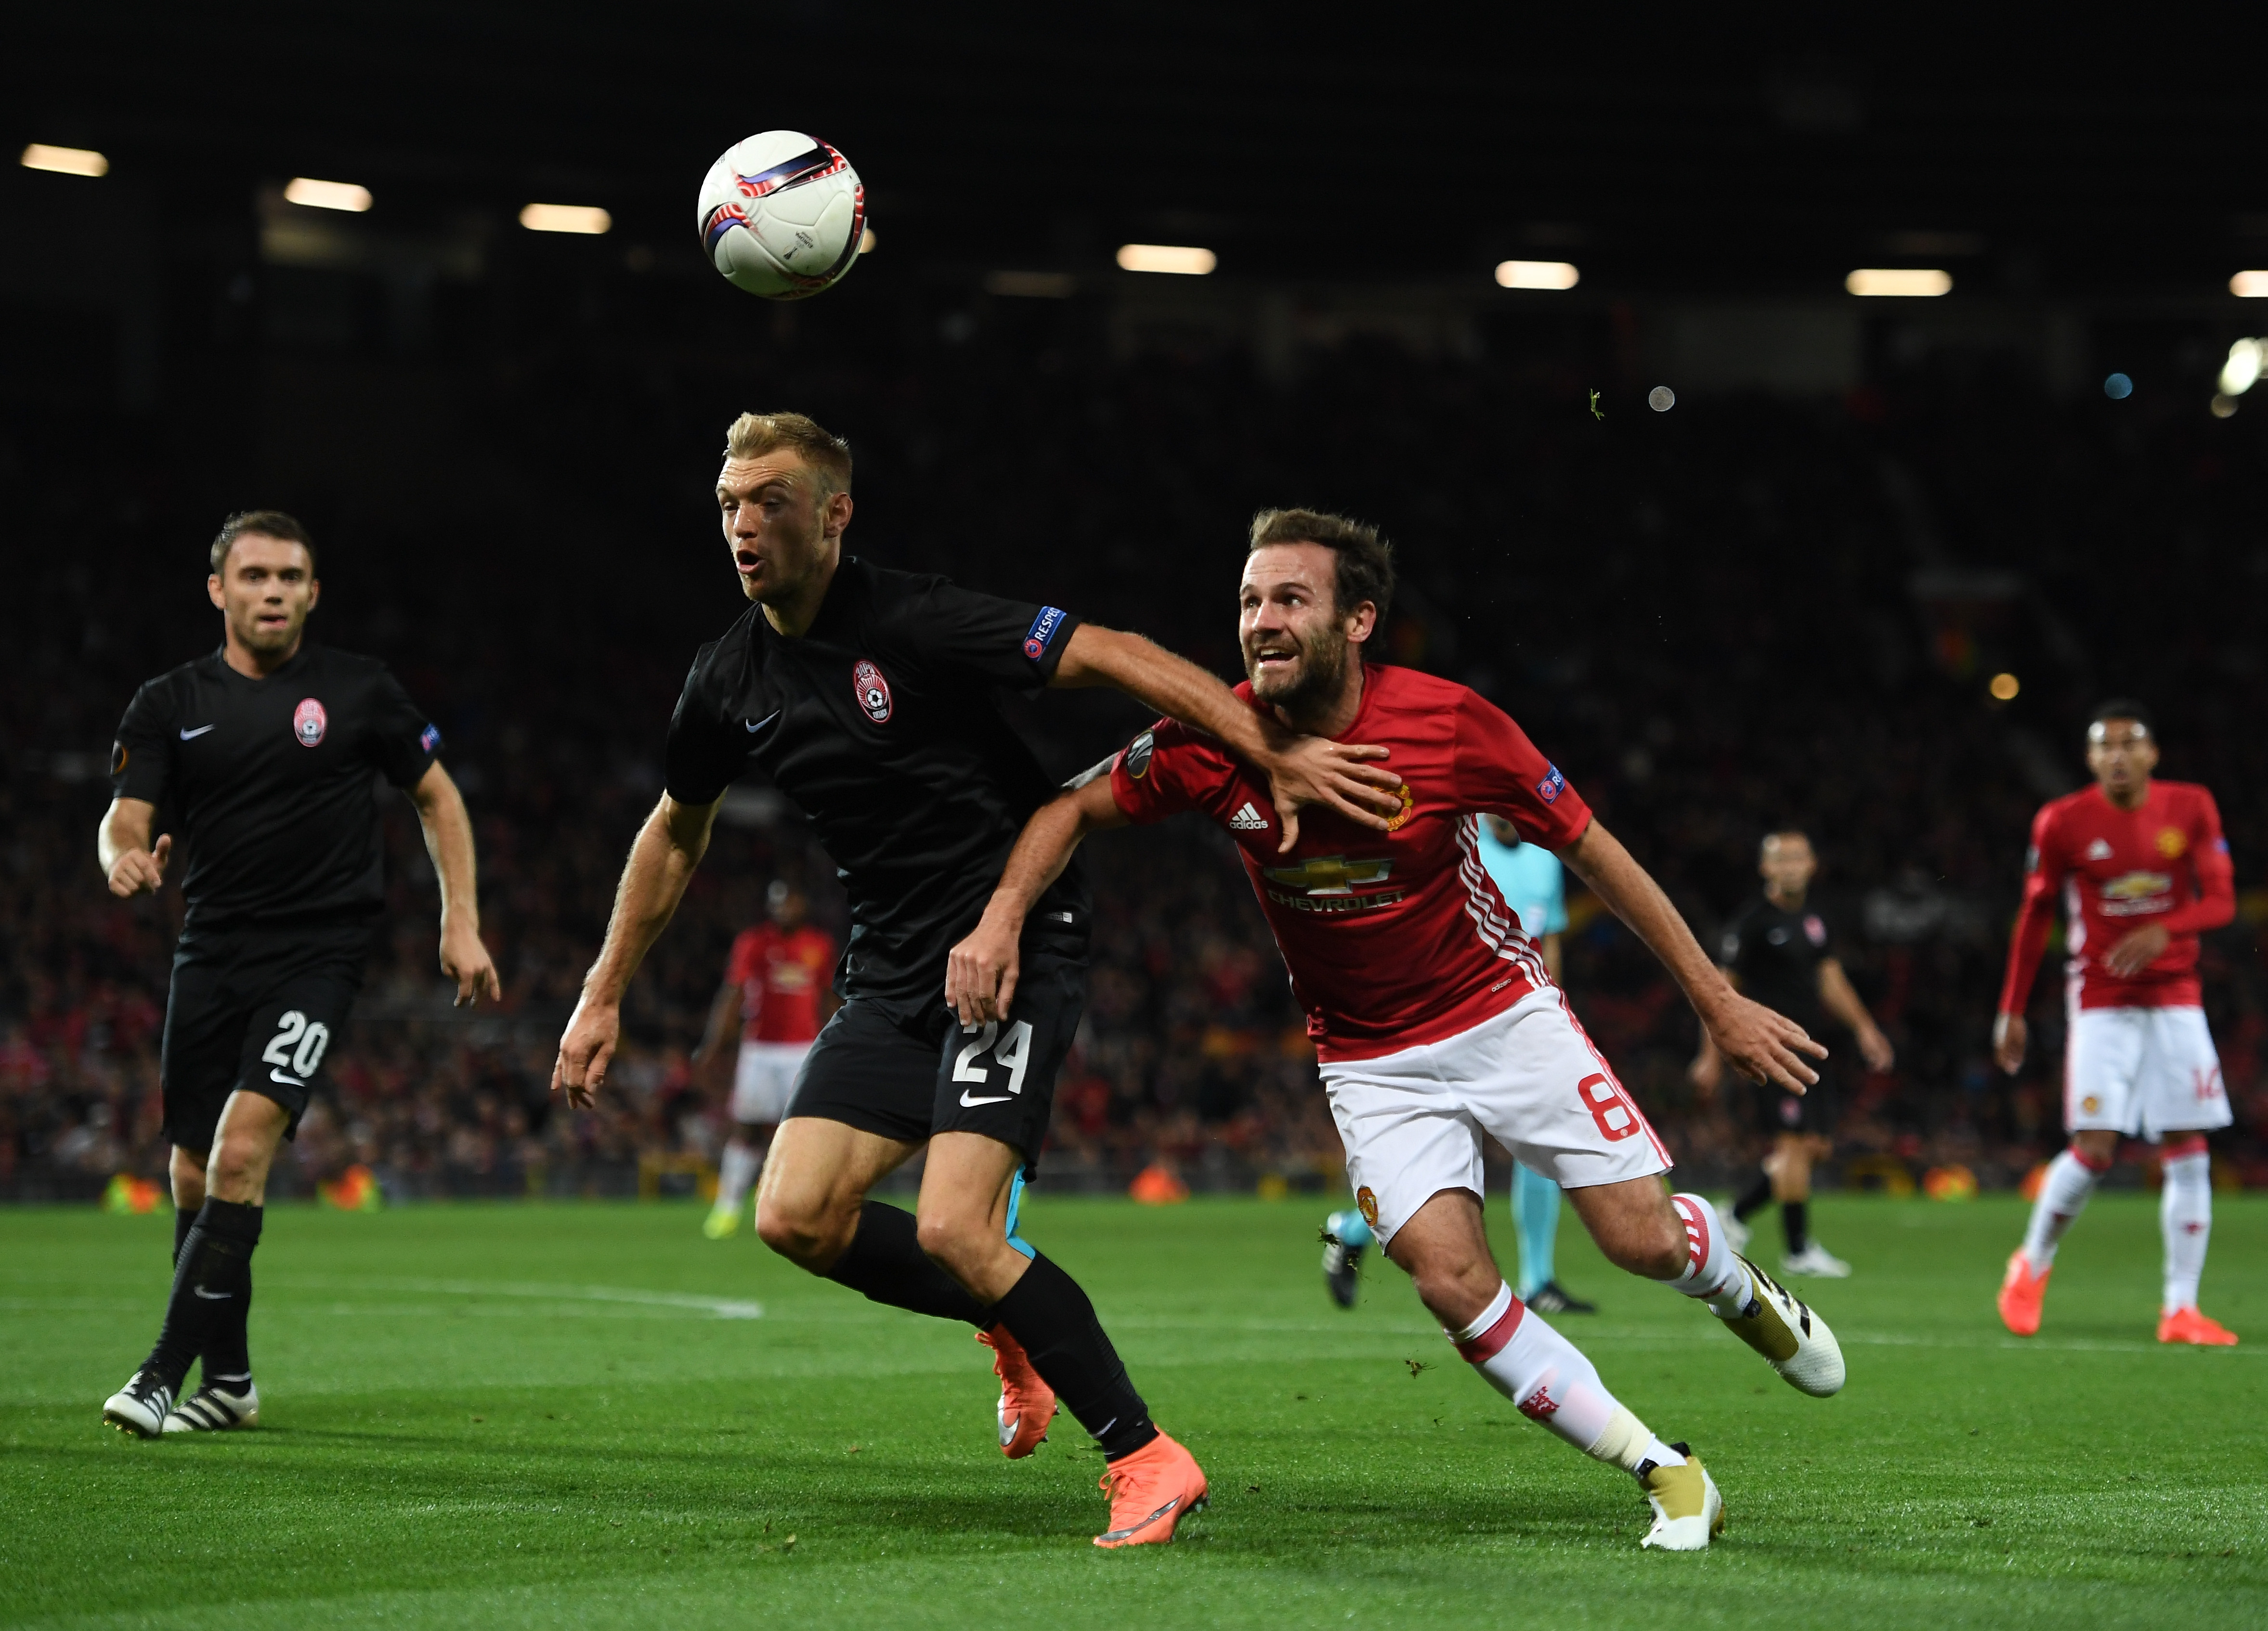 MANCHESTER, ENGLAND - SEPTEMBER 29:  Dmytro Hrechyshkin of Zorya Luhansk and Juan Mata of Manchester United battle for the ball during the UEFA Europa League group A match between Manchester United FC and FC Zorya Luhansk at Old Trafford on September 29, 2016 in Manchester, England.  (Photo by Laurence Griffiths/Getty Images)